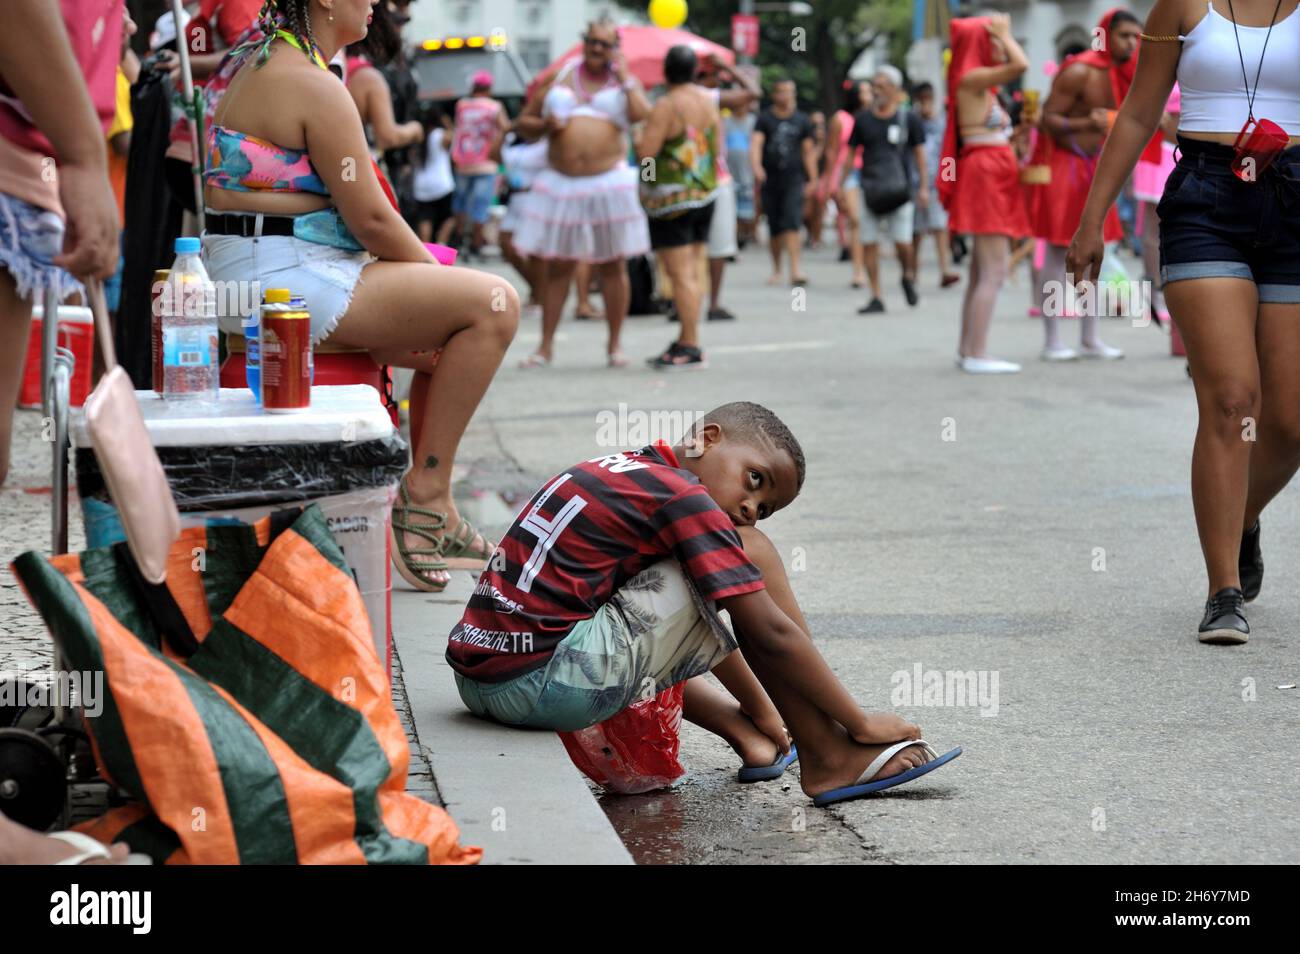 Brazil–February 22, 2020:A boy wearing a Flamengo soccer team jersey observes costumed revelers during a street carnival parade held in Rio de Janeiro Stock Photo